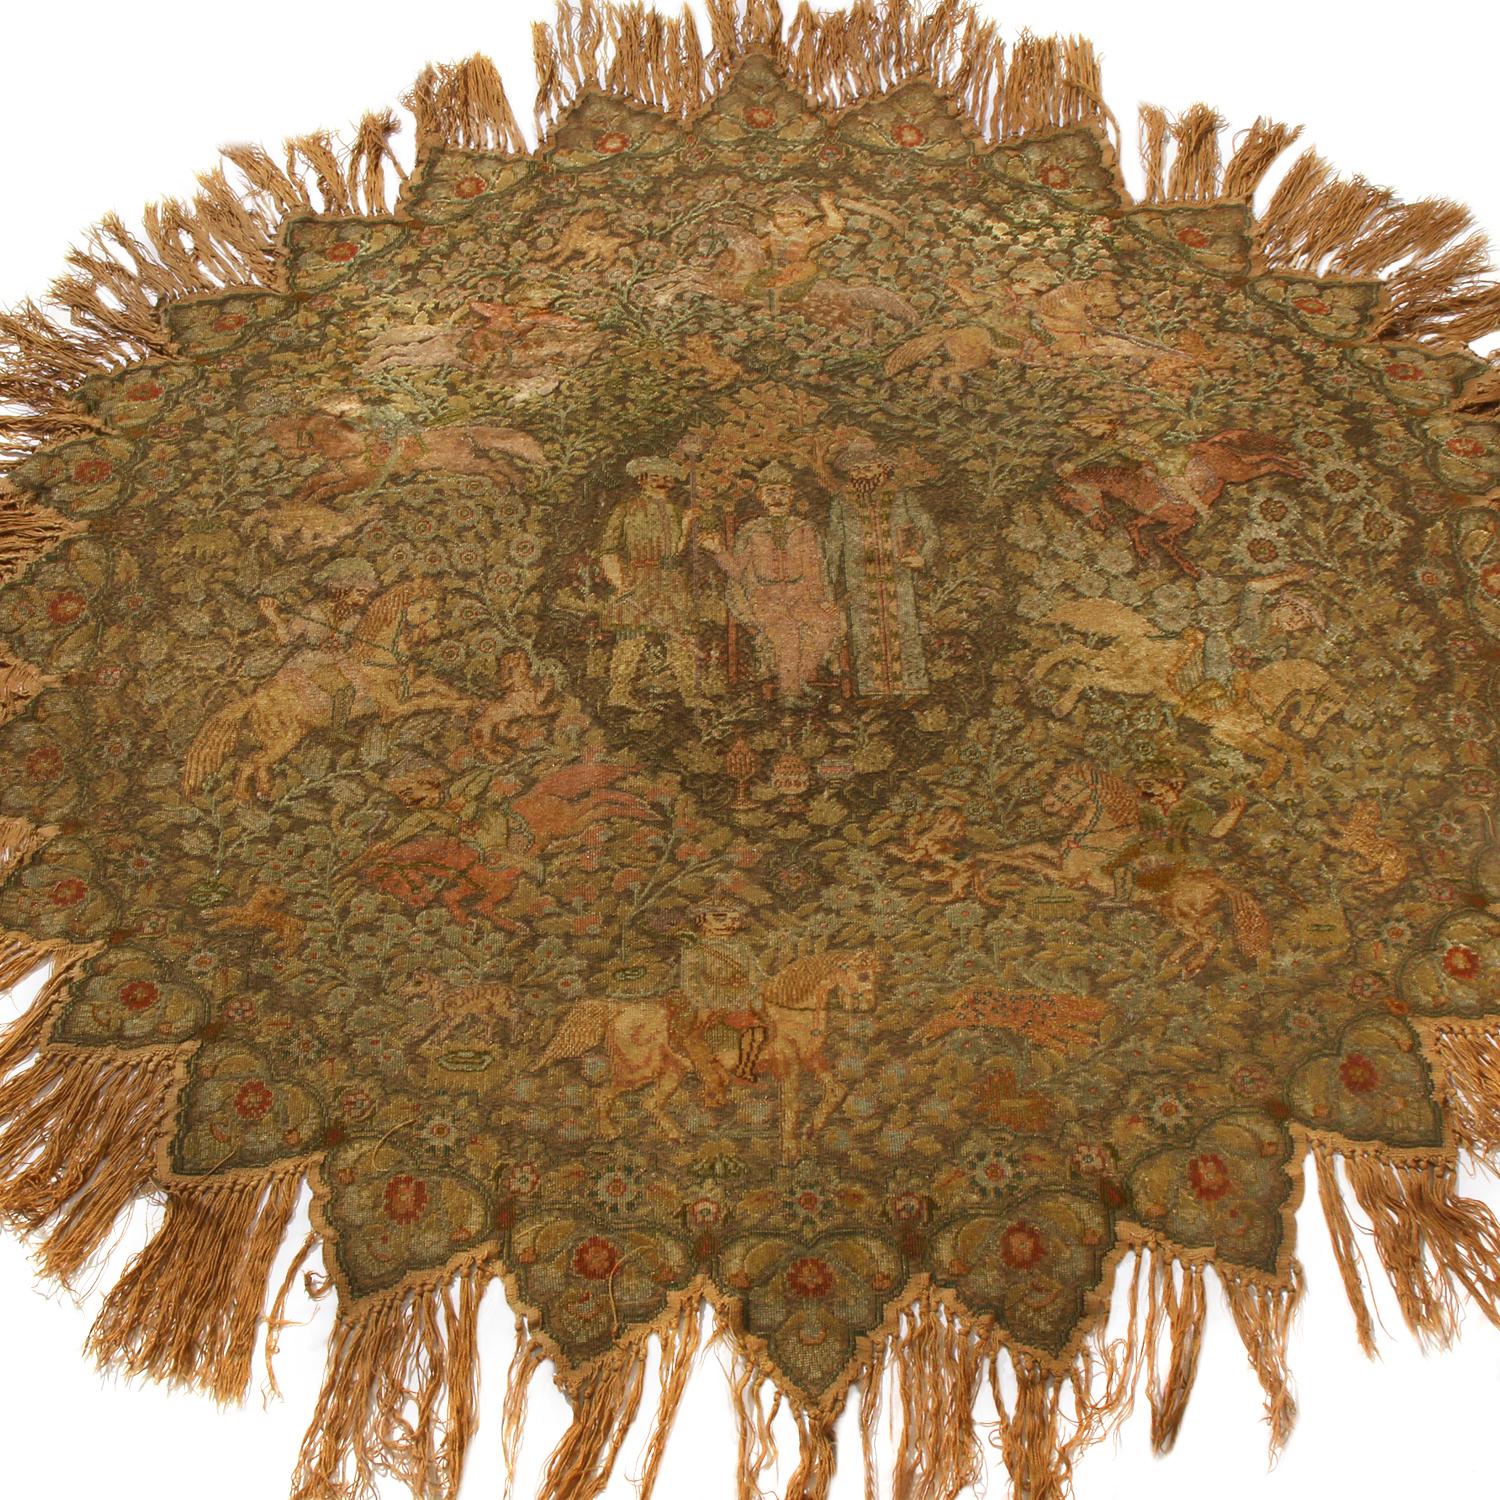 Hand knotted in Turkey between 1880-1890, this antique metallic Kayseri circle rug enjoys a spacious but inviting toothed guard design, complemented by tasseled fringes highlighting the finesse of the inner pattern and its crimson red accents as